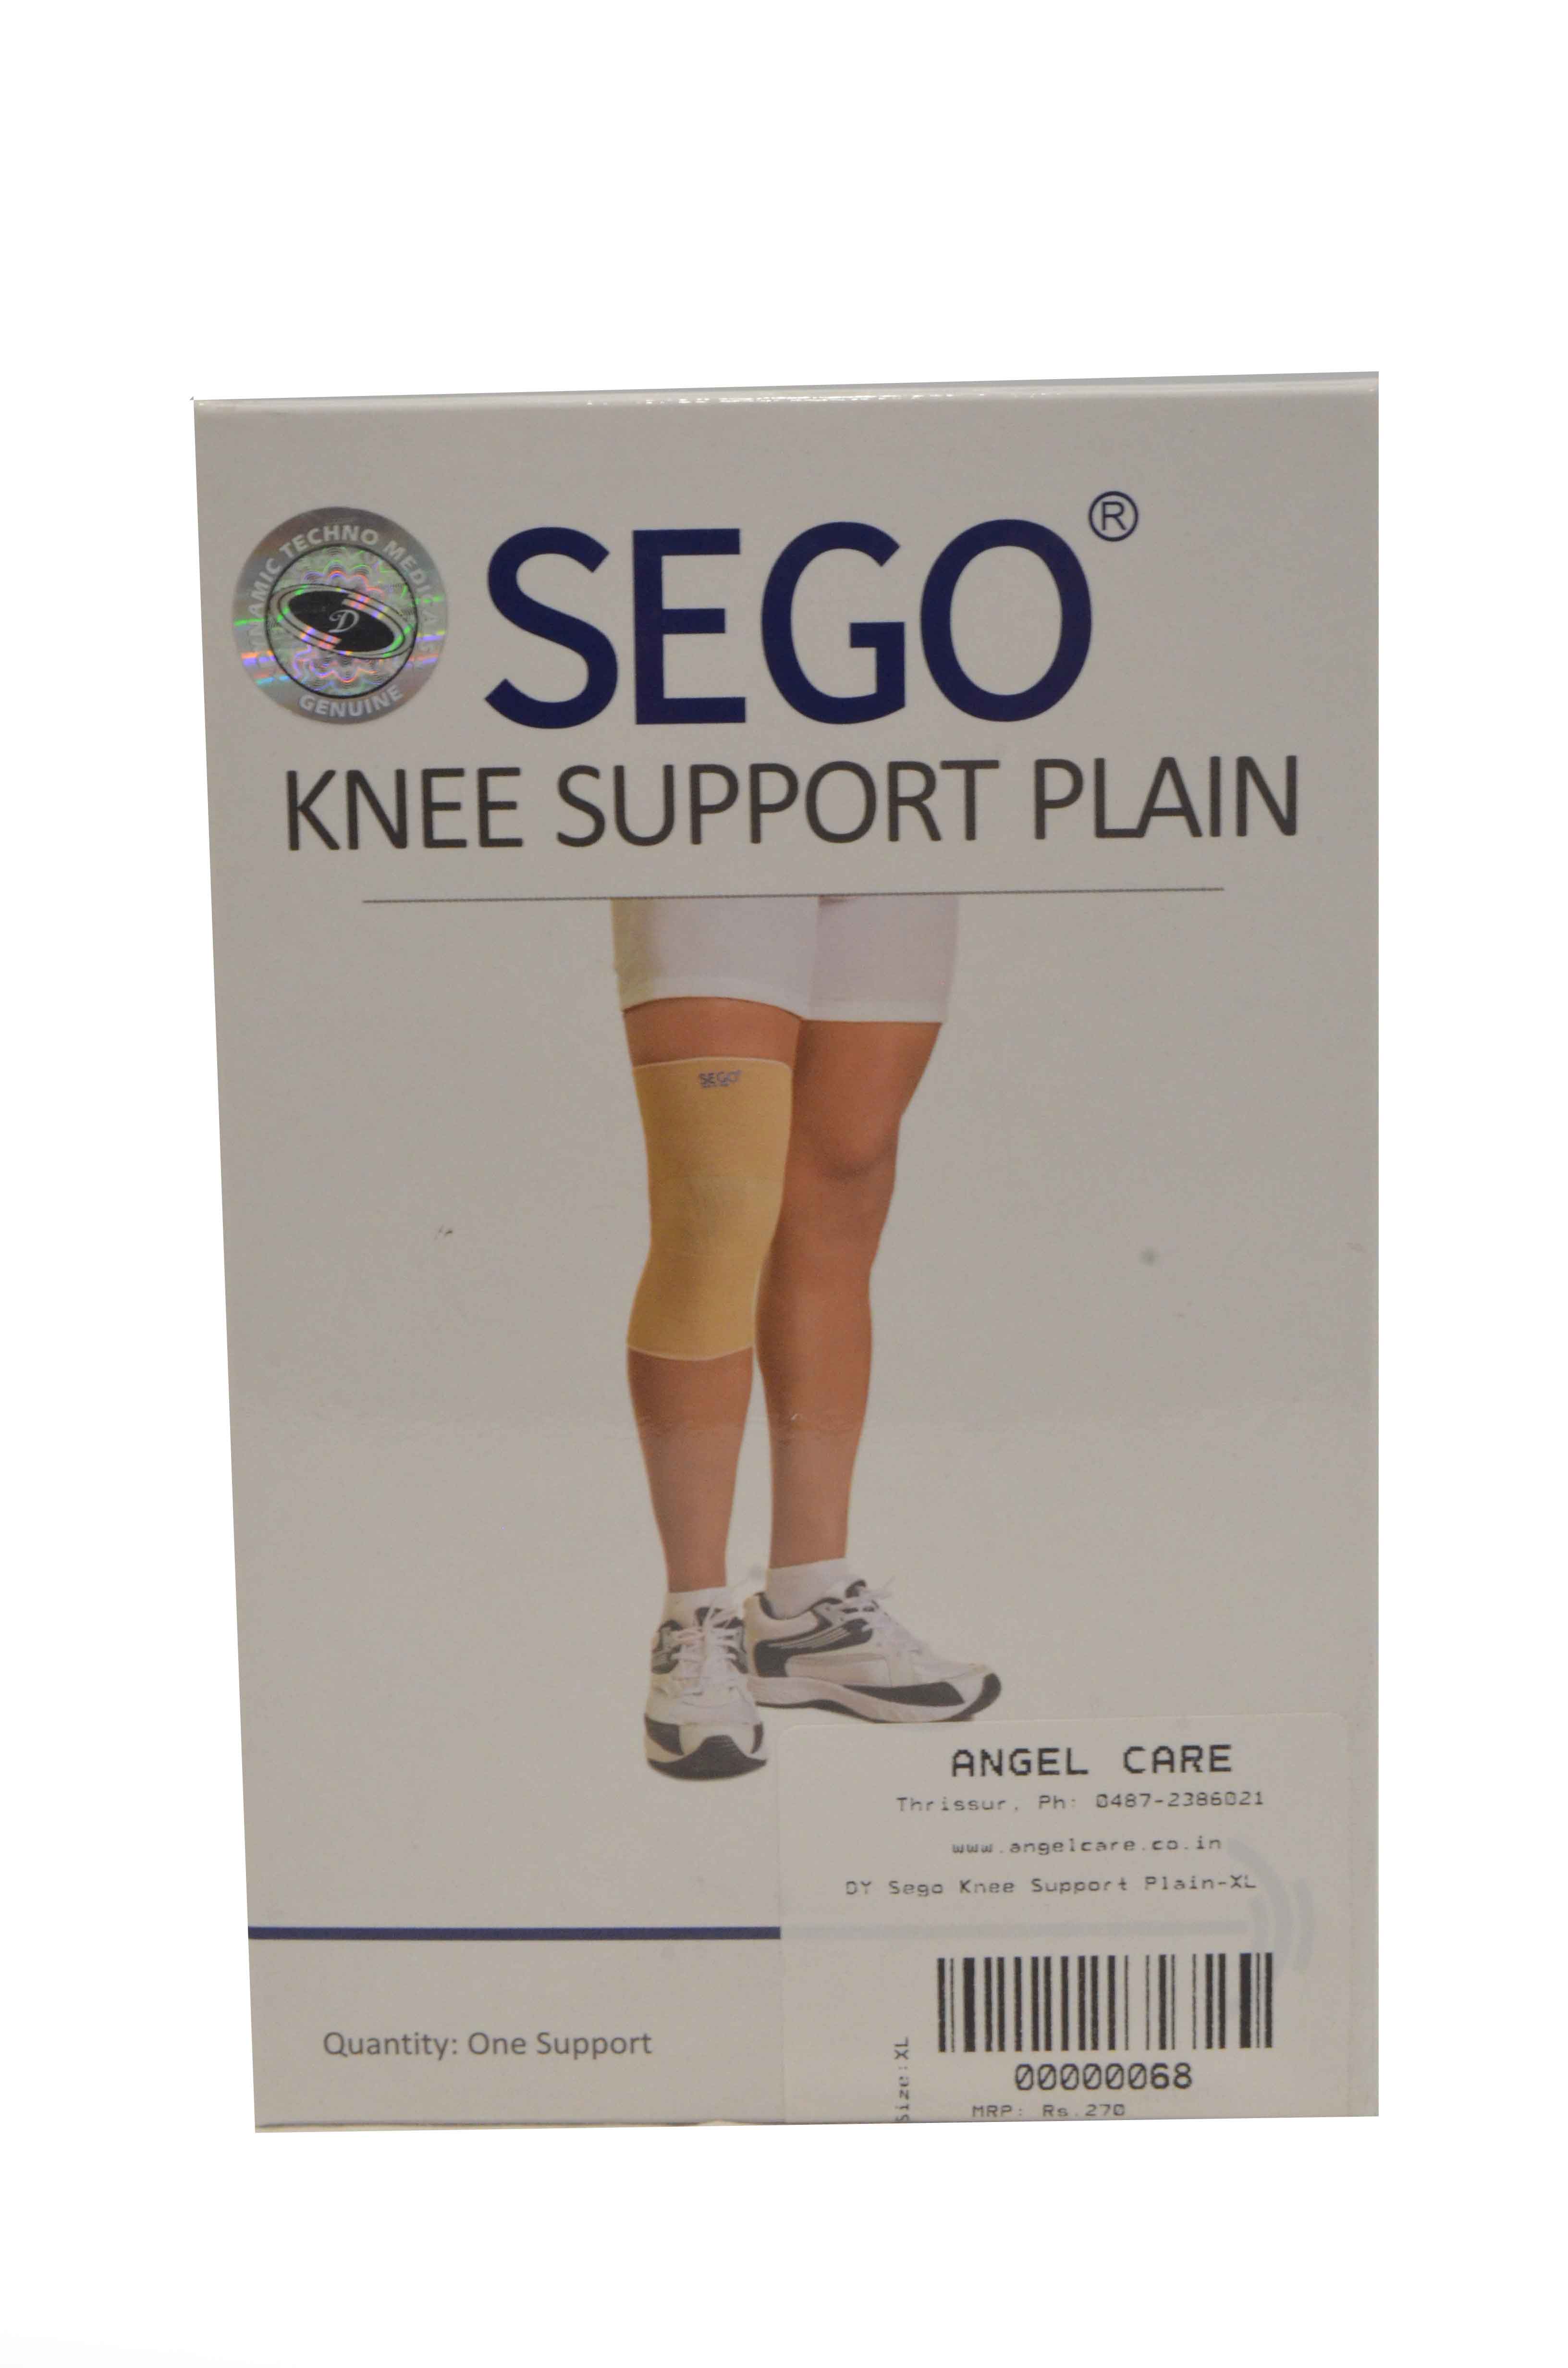 DYNA Sego Knee Support Plain - Angel Care